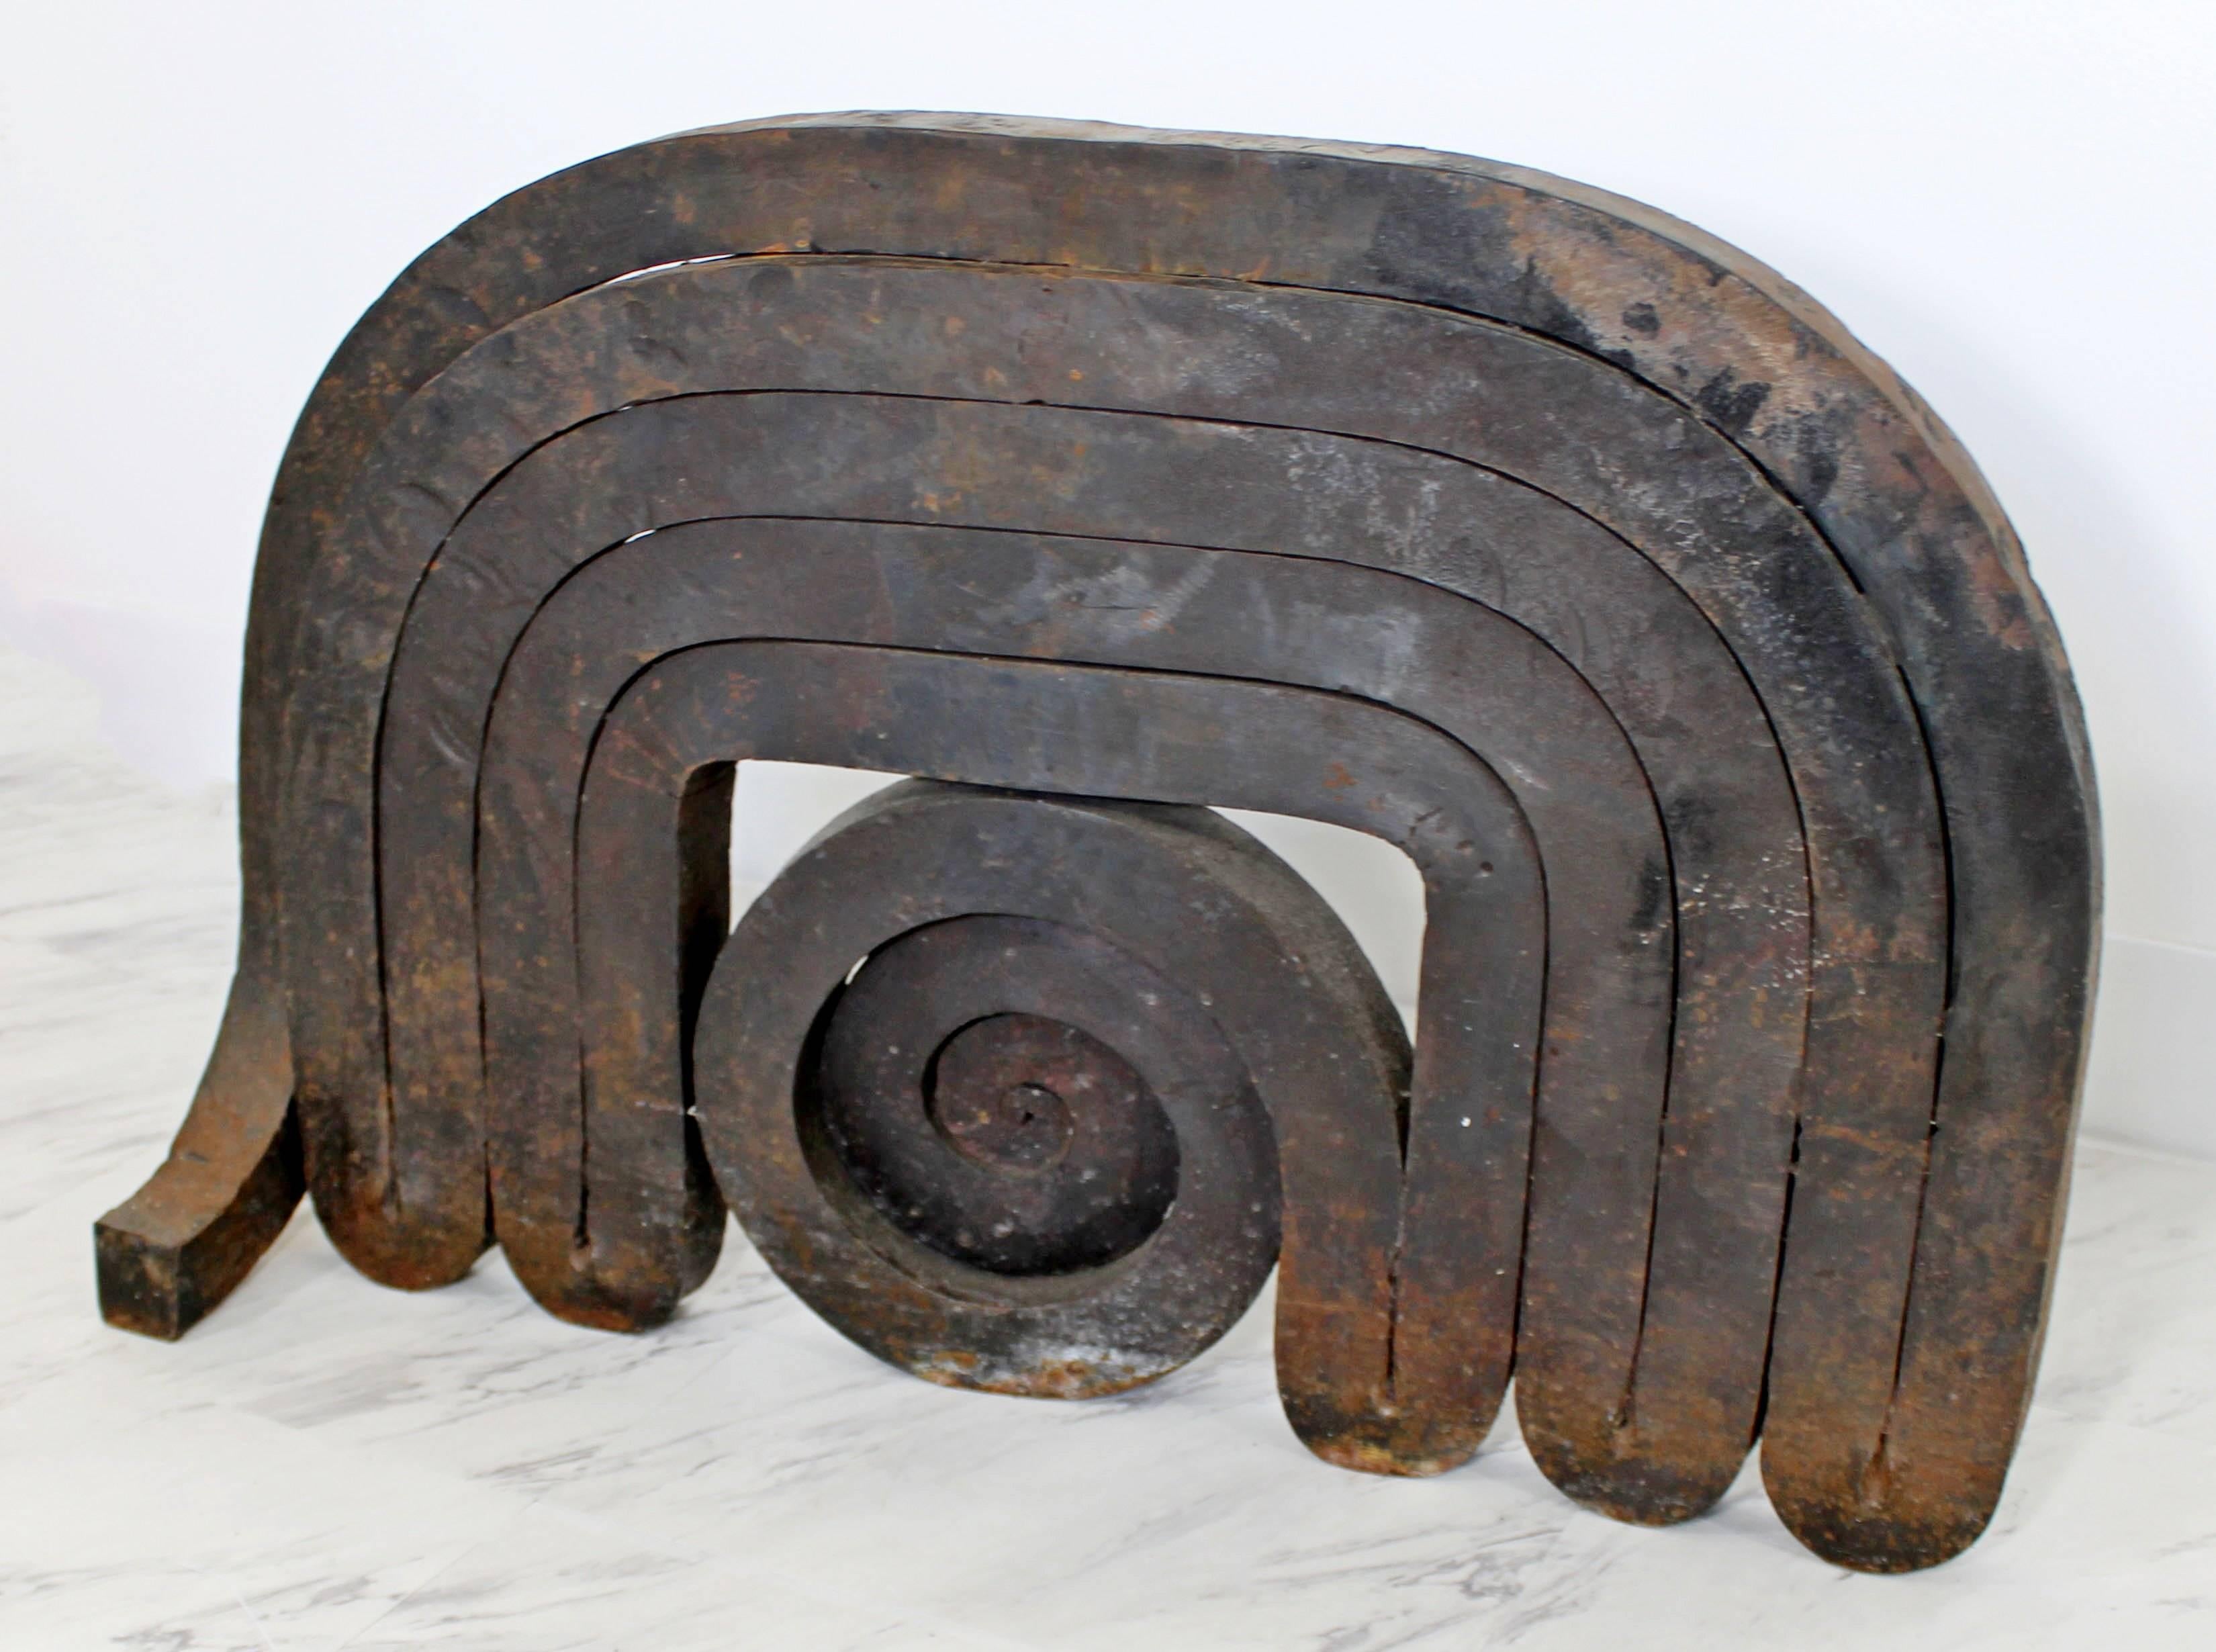 Late 20th Century Forged Steel Sculpture by Martin Chirino Lopez Titled Laberintia, 1987